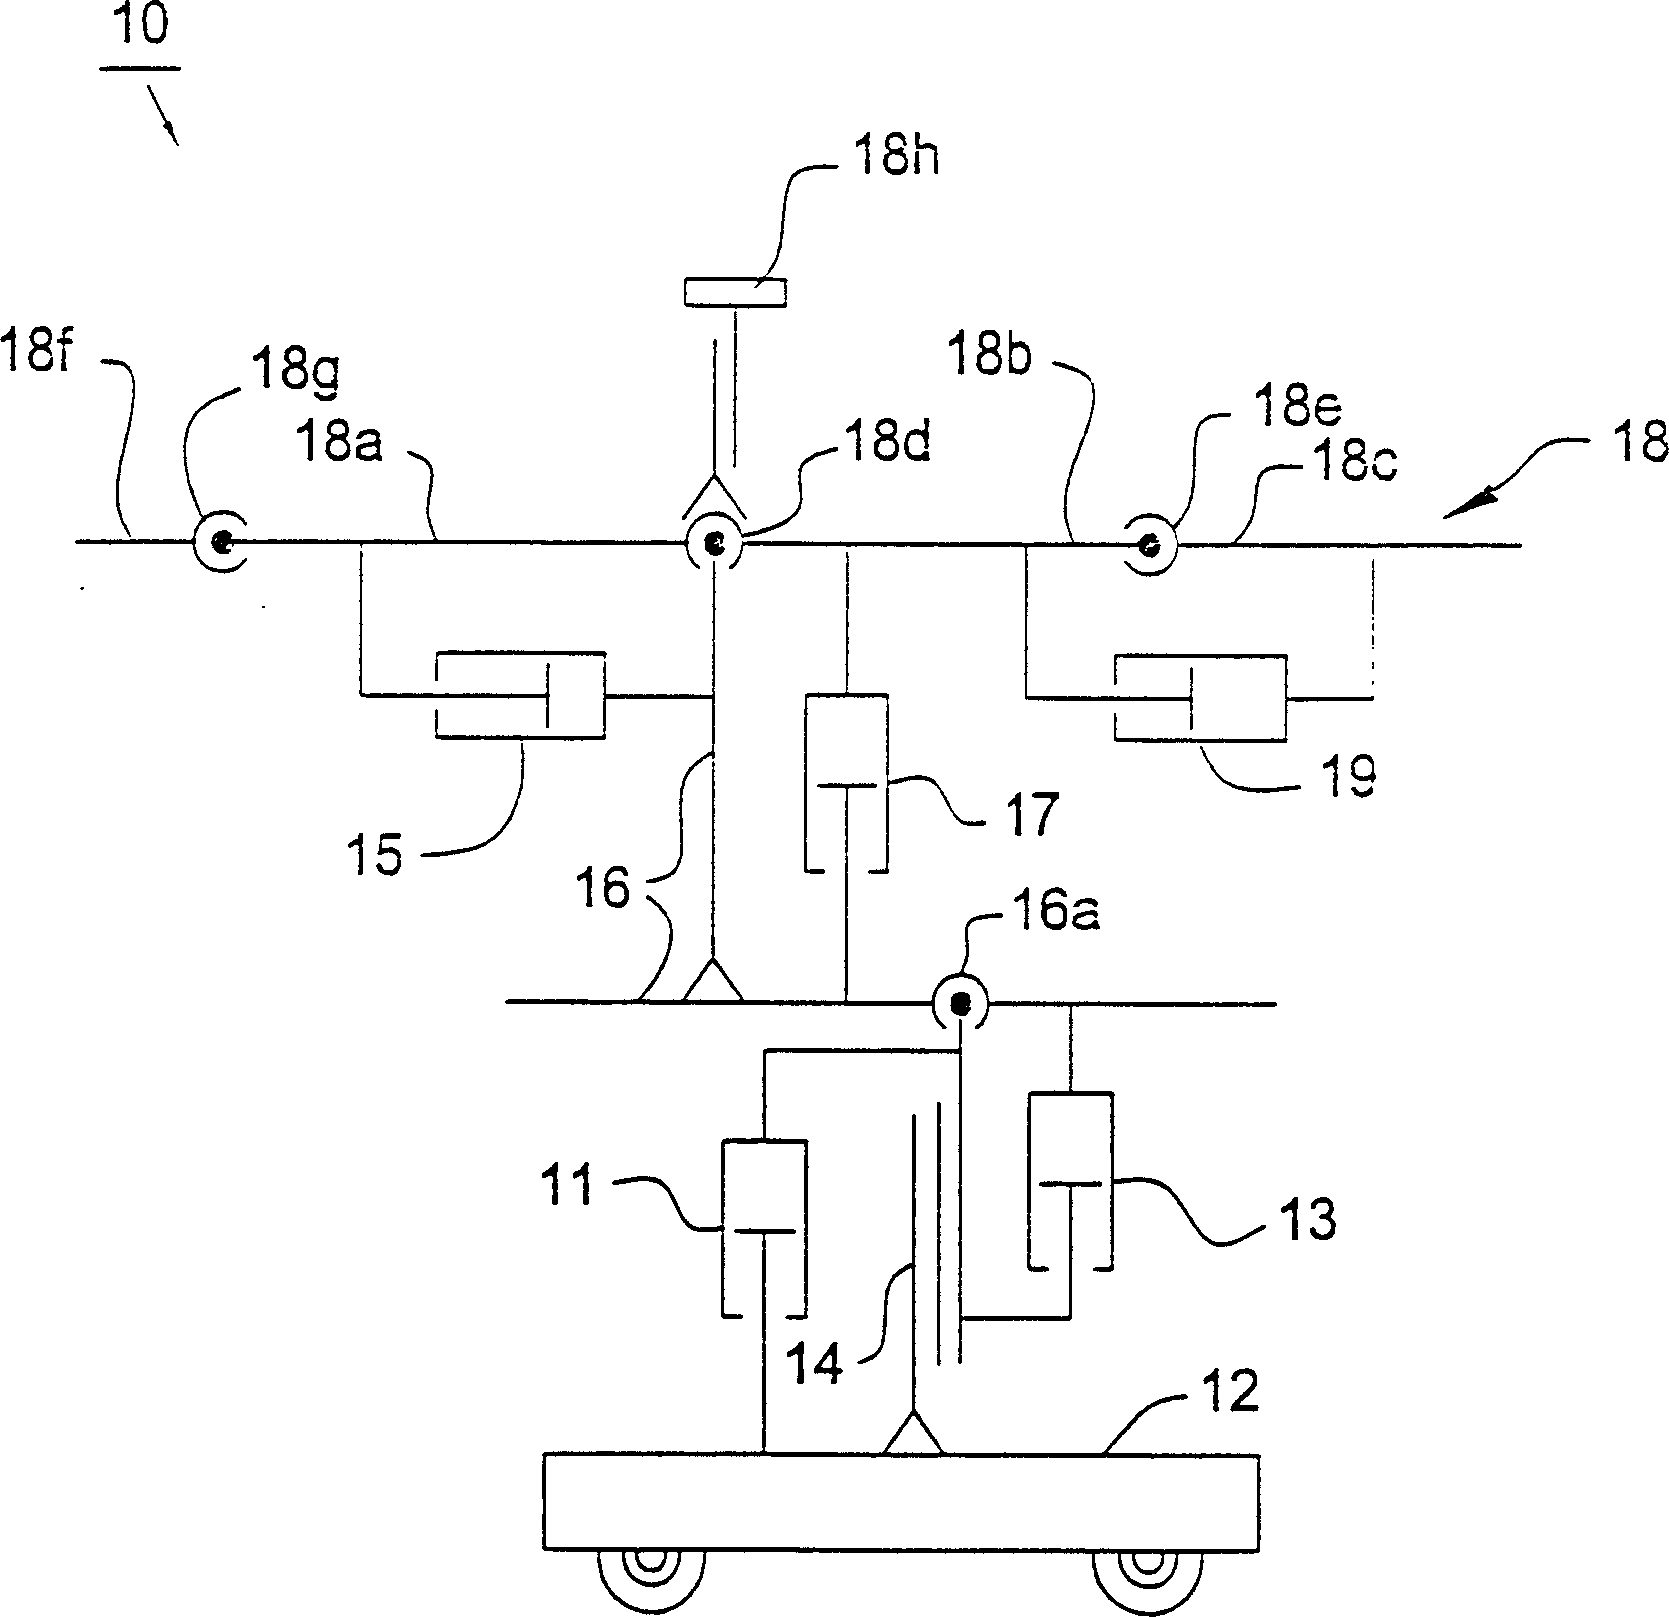 Synchronous range oil pressure unit of operating table